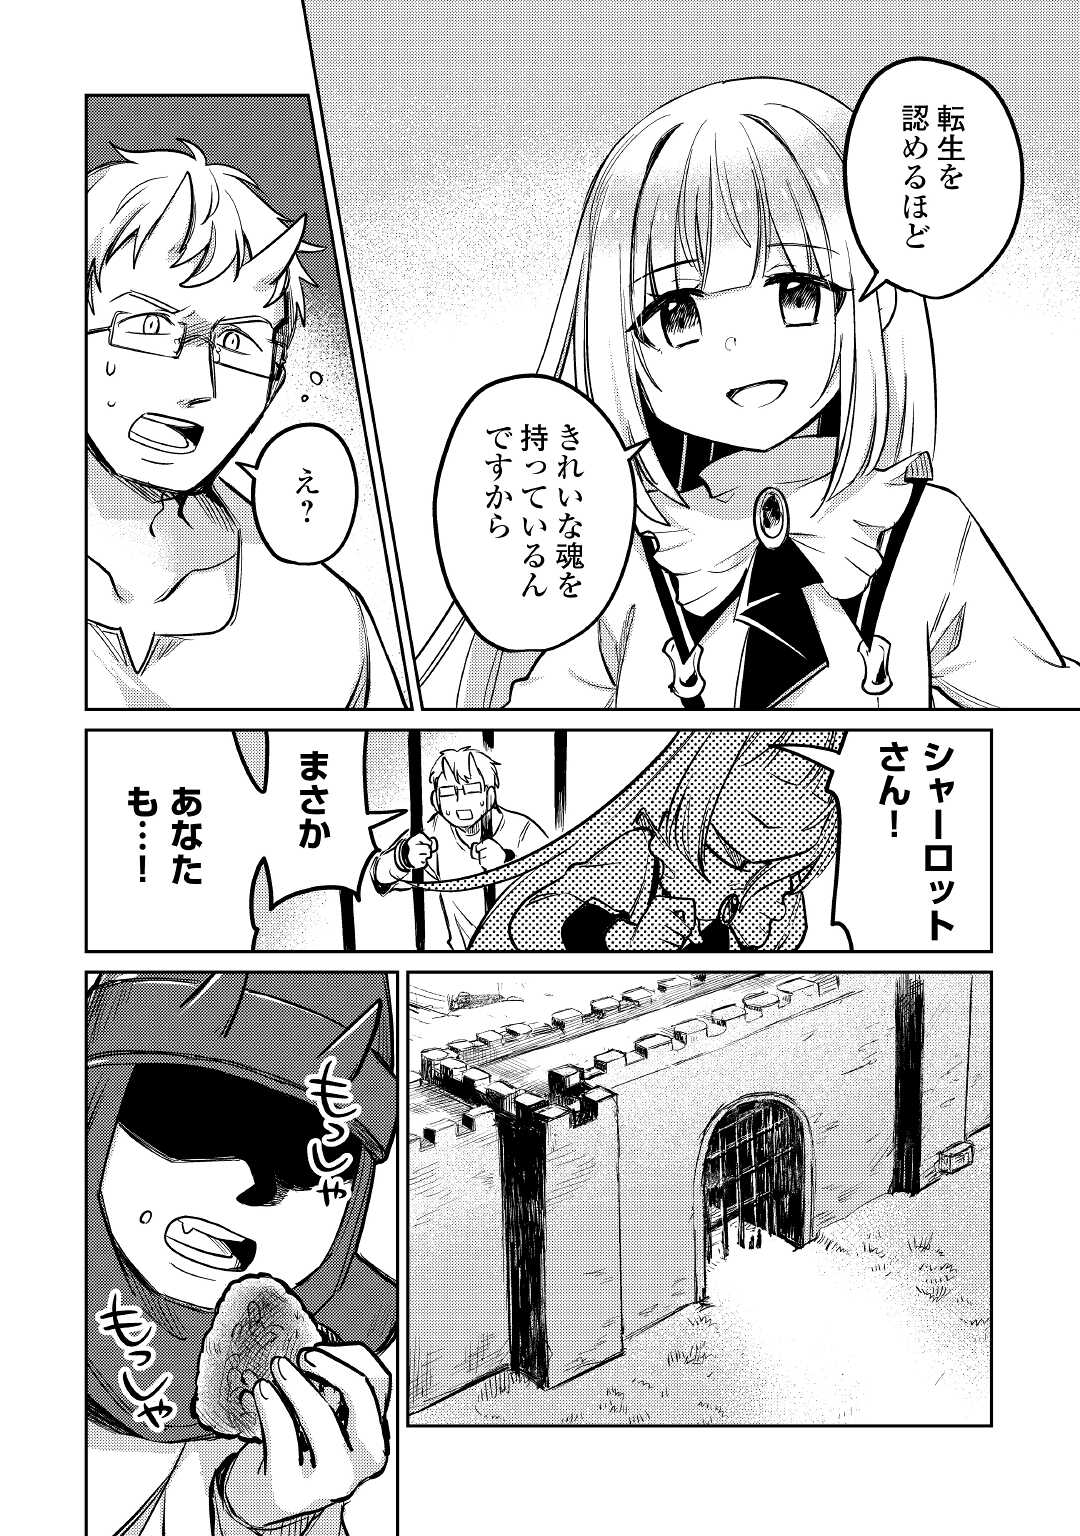 The Former Structural Researcher’s Story of Otherworldly Adventure 第40話 - Page 24